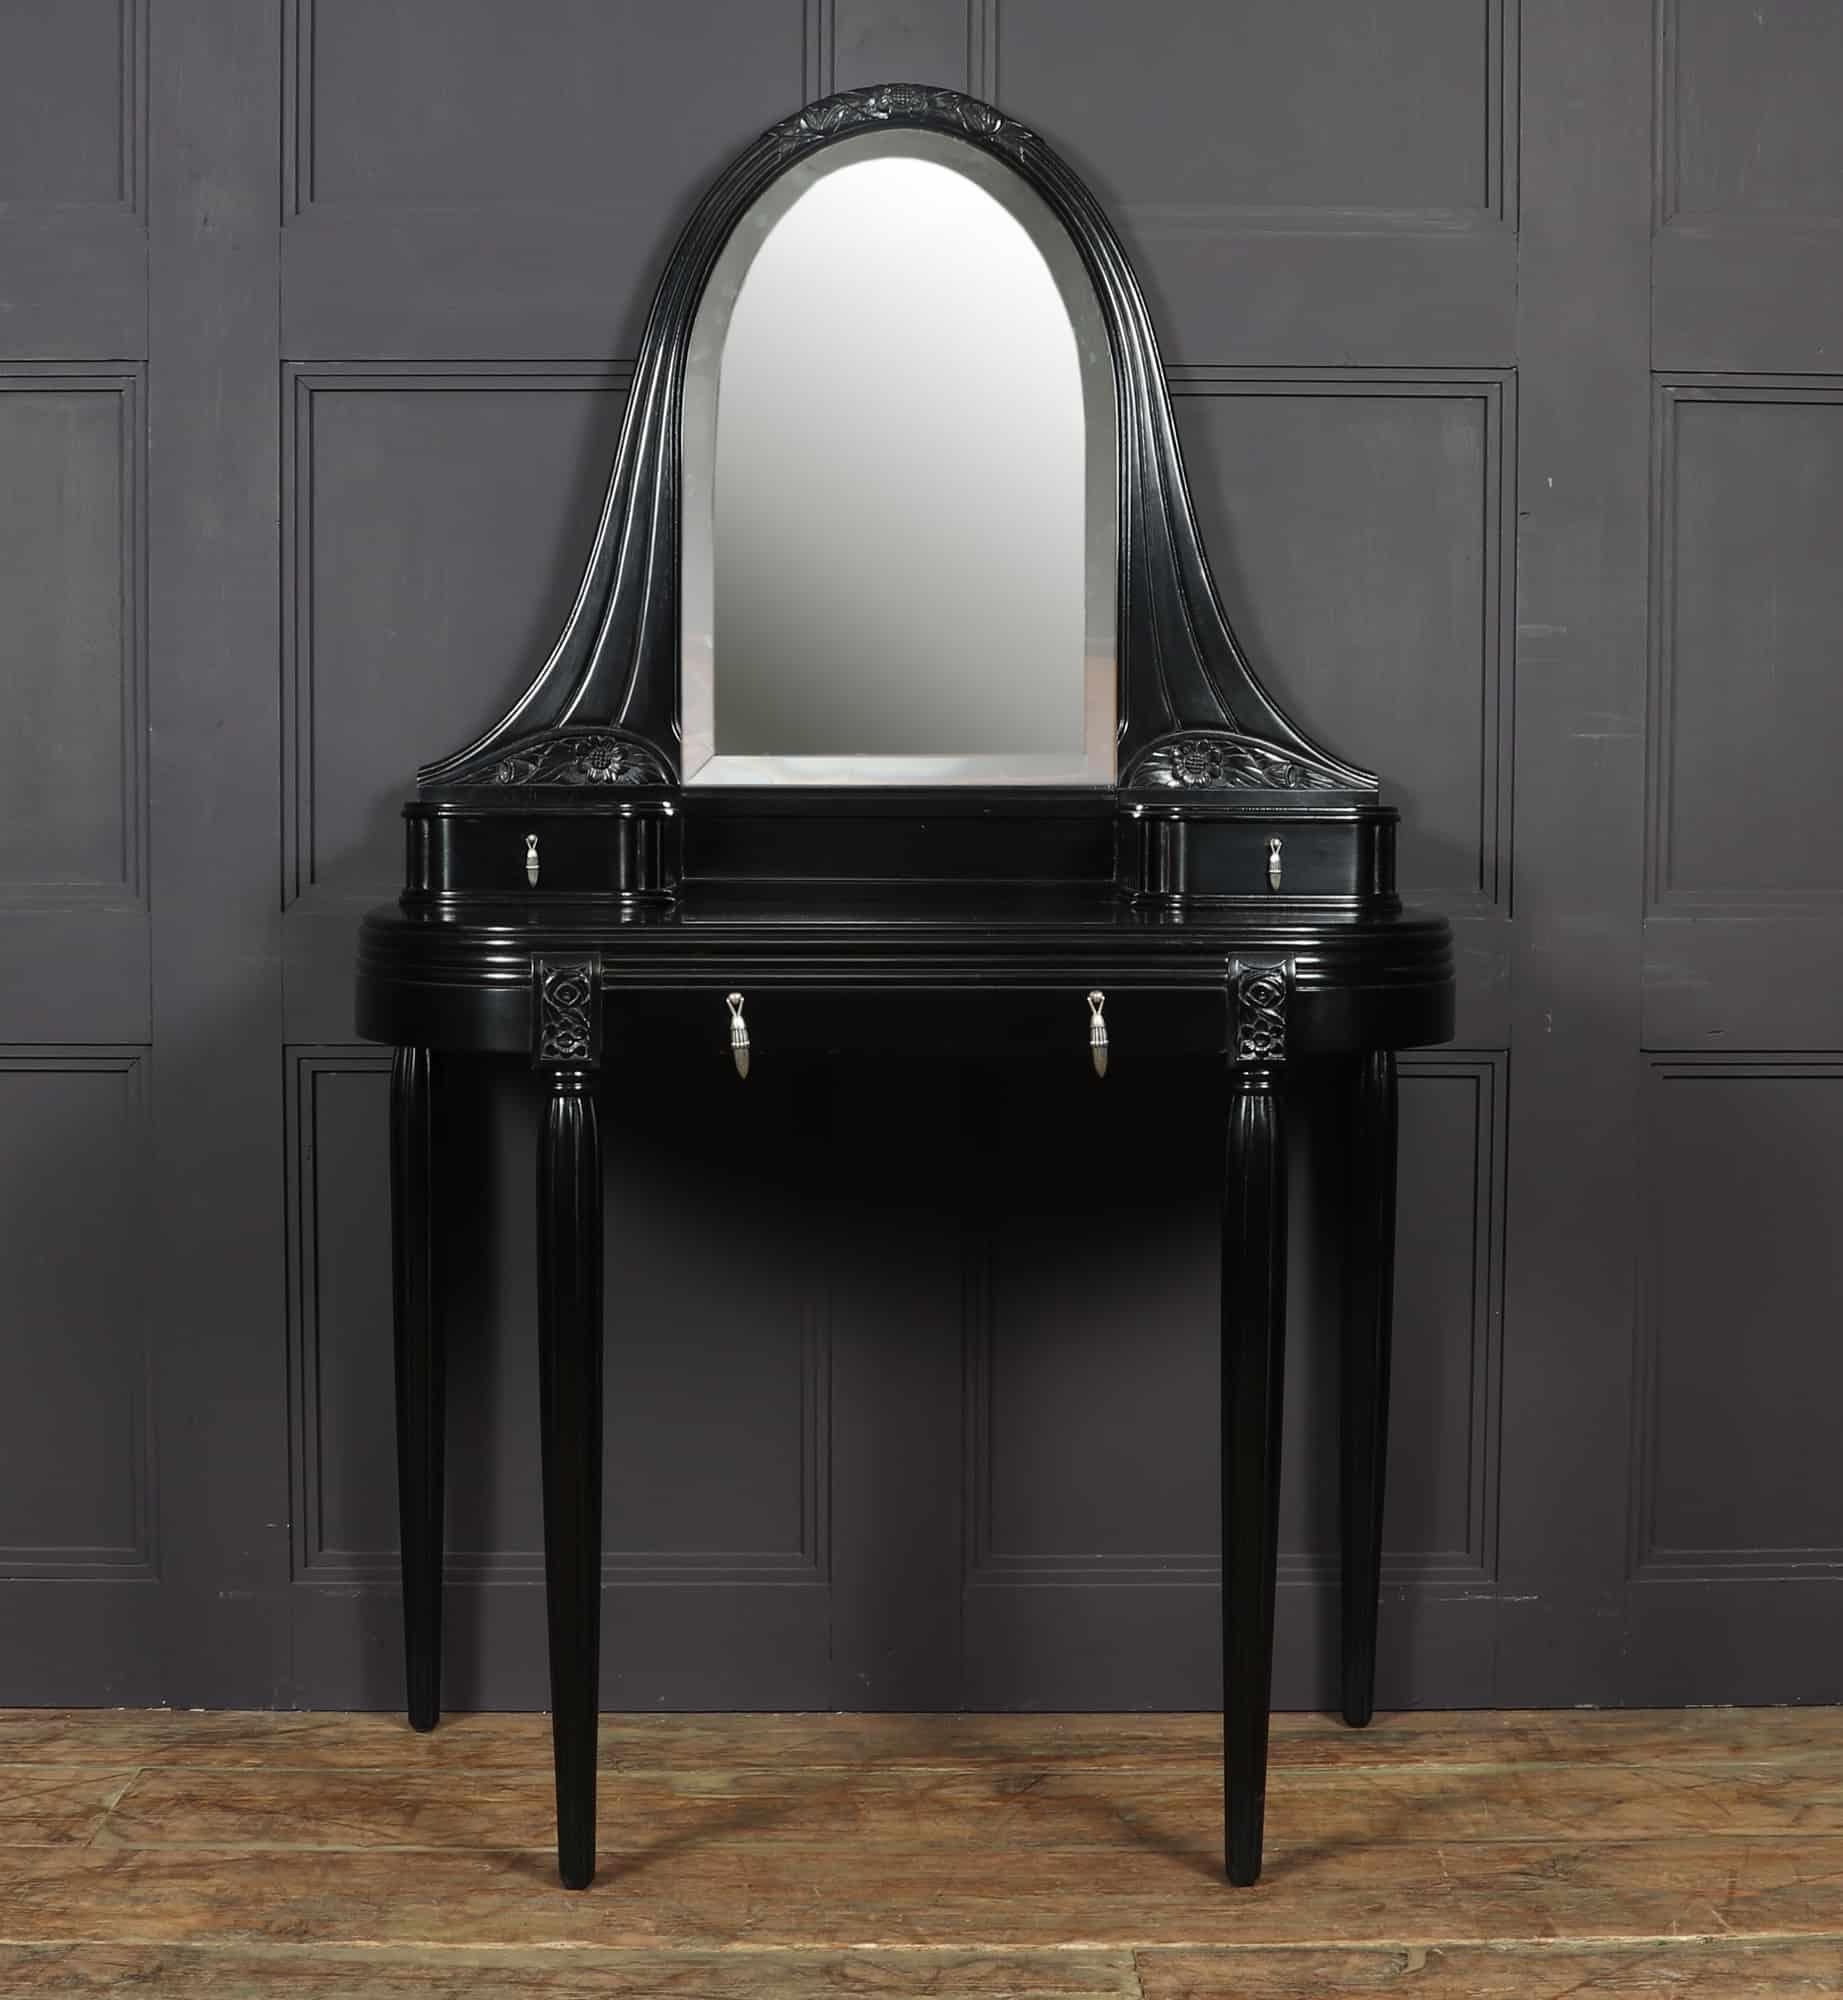 French Art Deco dressing table c1925
A stunning Art Deco dressing table produced in France in the mid 1920s from solid mahogany and ebonised with a piano black finish, the table has a central drawer with two table top drawers with very decorative